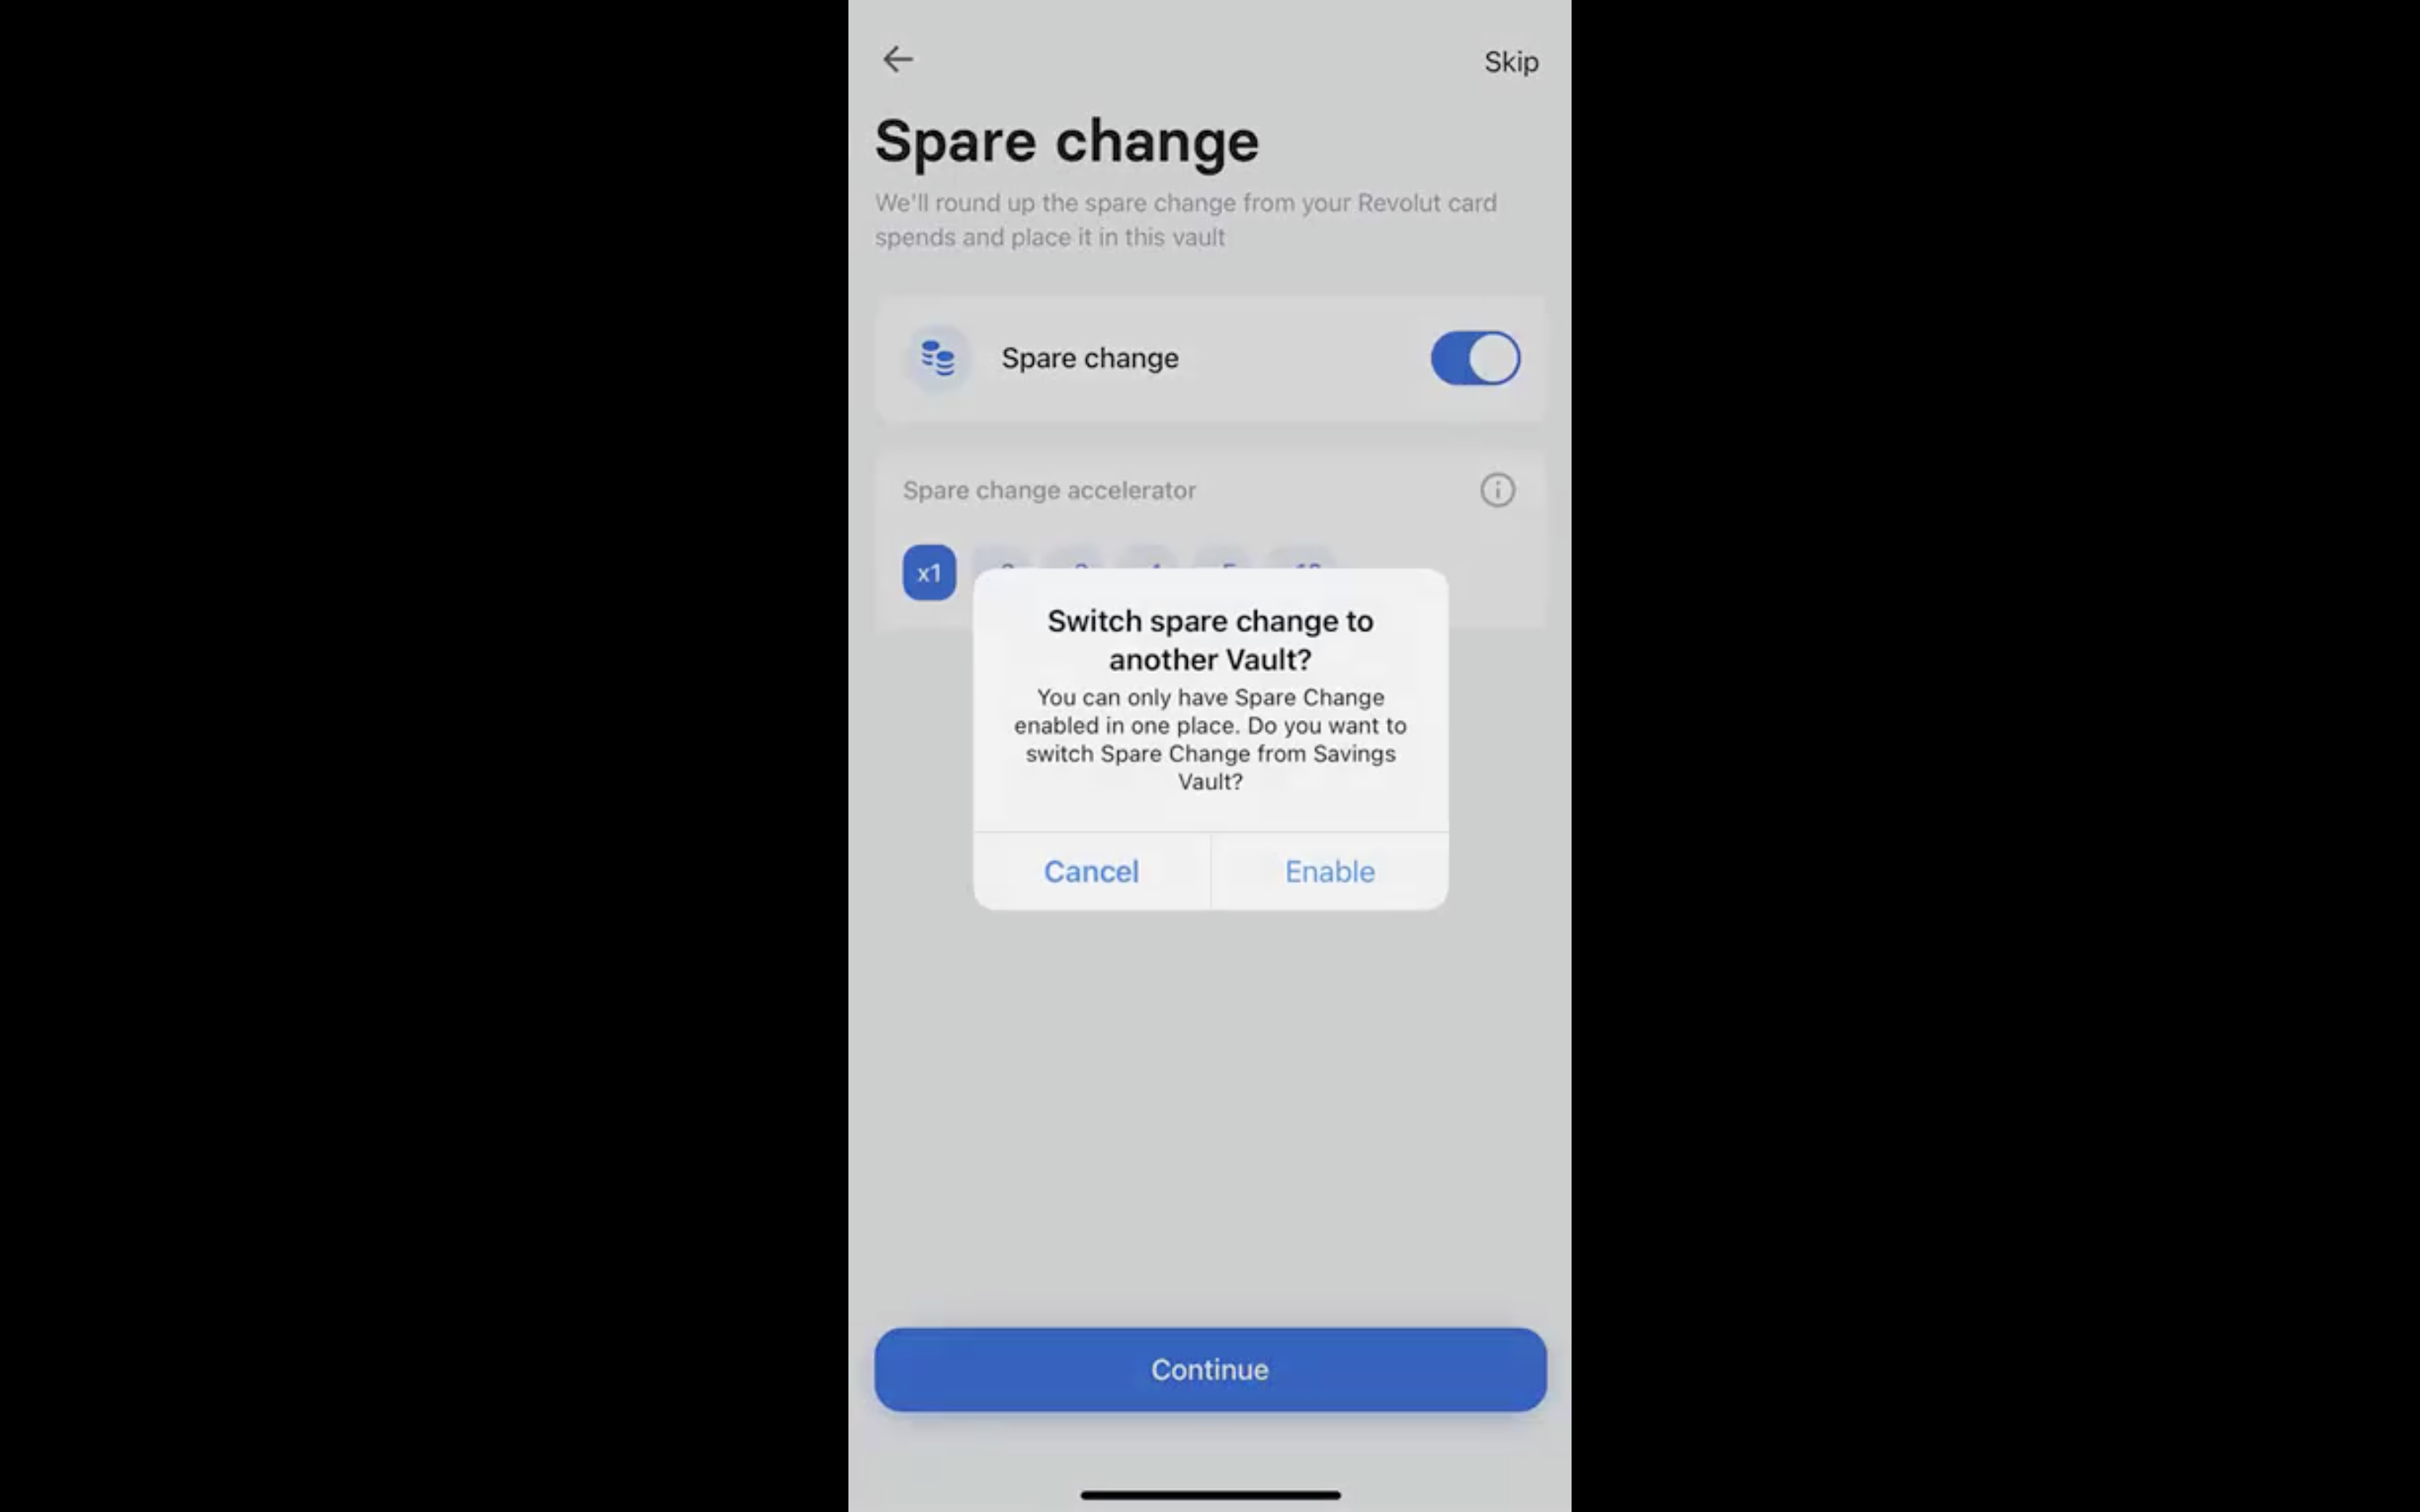 The round up spare change feature in Revolut